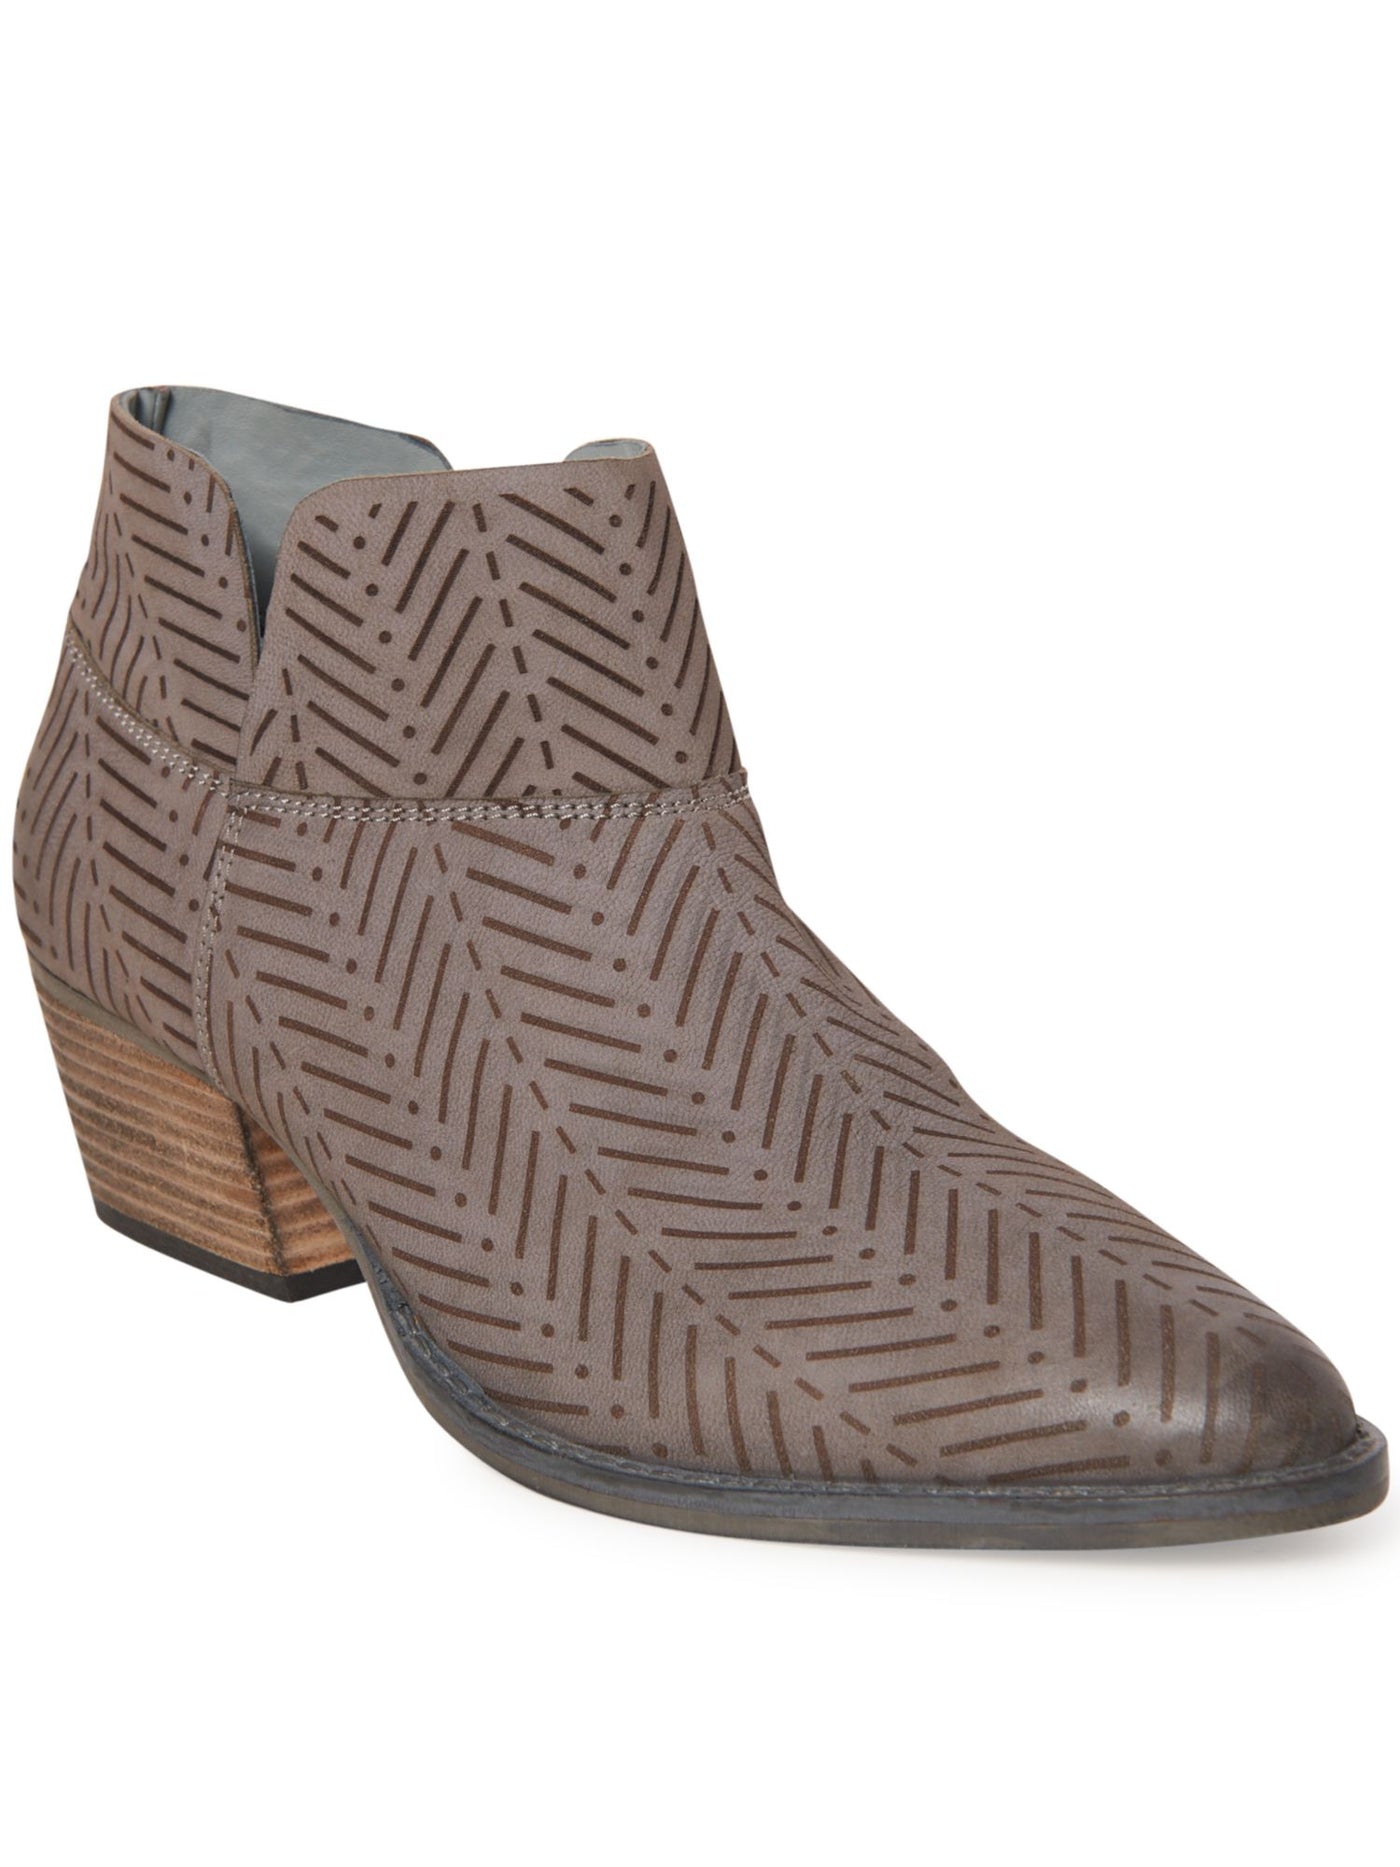 CHARLES BY CHARLES DAVID Womens Gray Perforated Padded Zander Almond Toe Block Heel Zip-Up Leather Booties 5.5 M